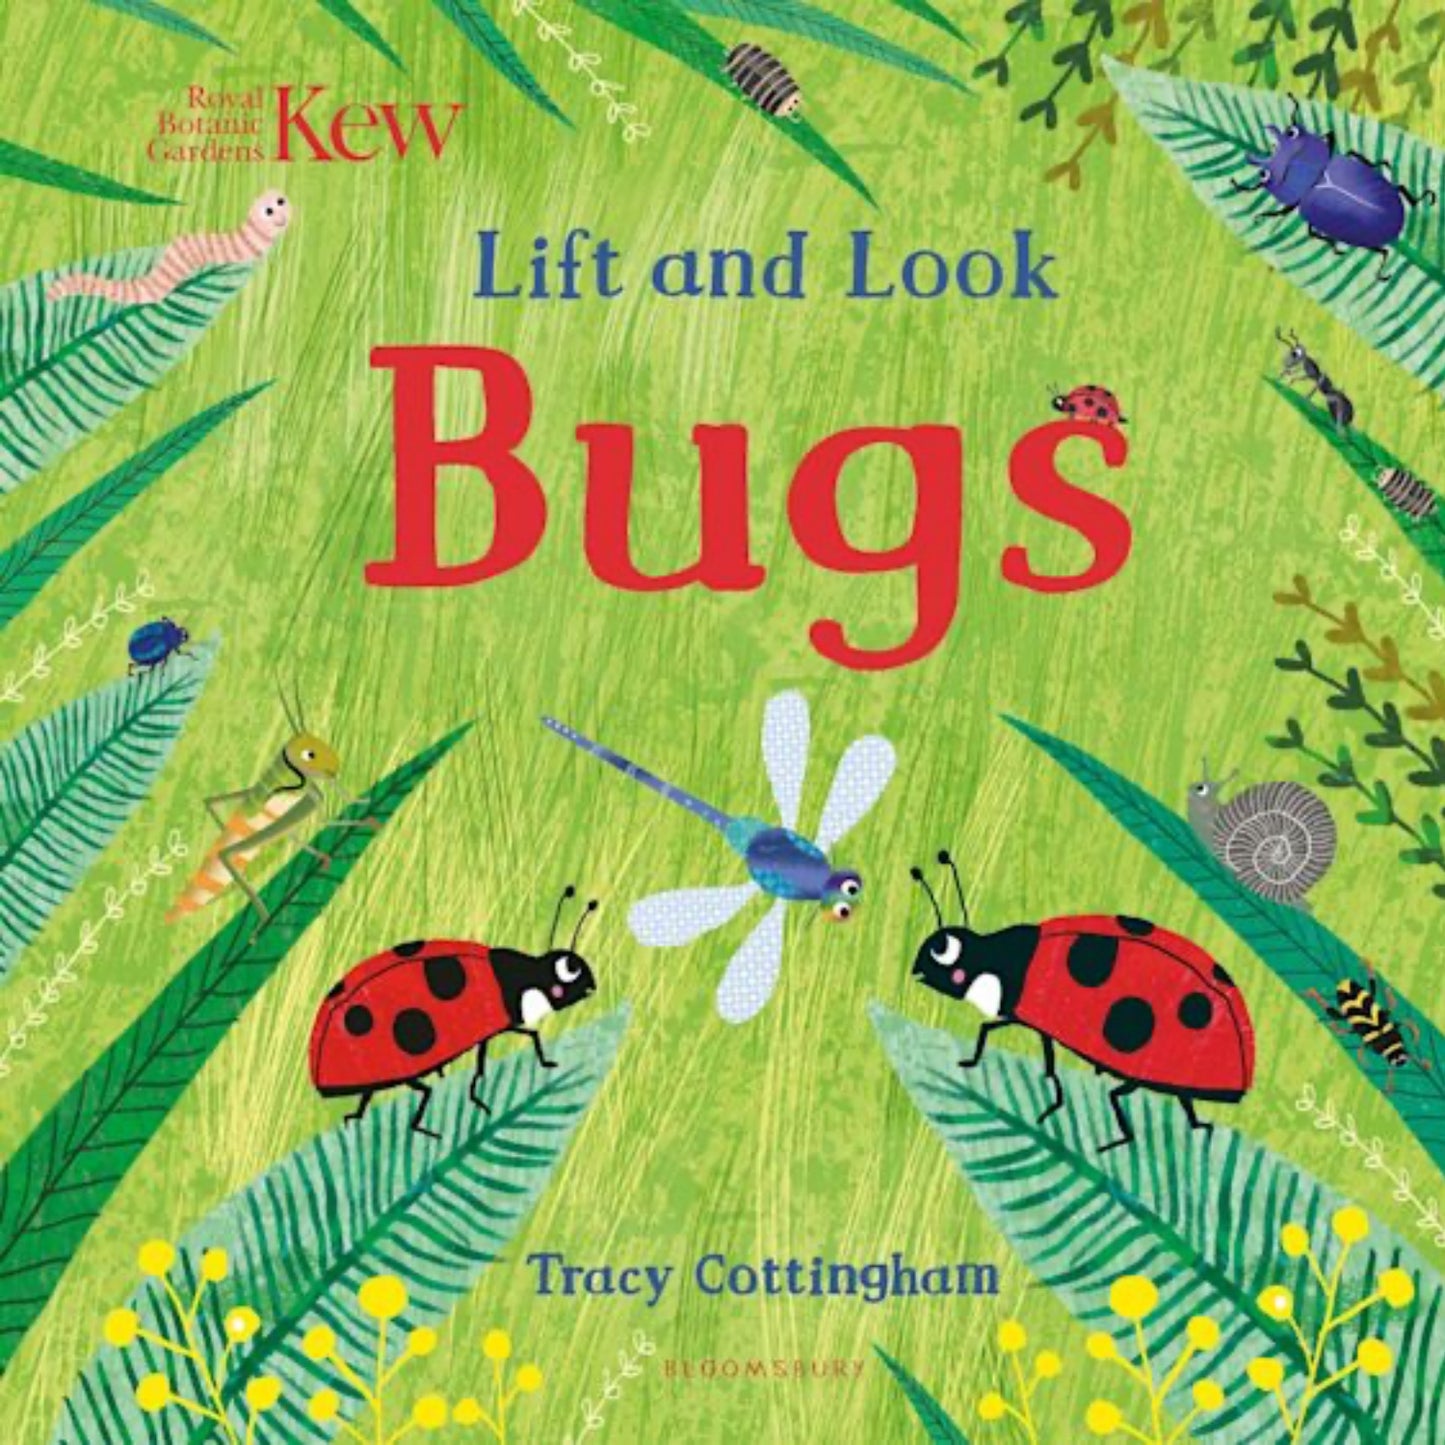 Lift and Look Bugs - Kew | Children's Board Book on Nature